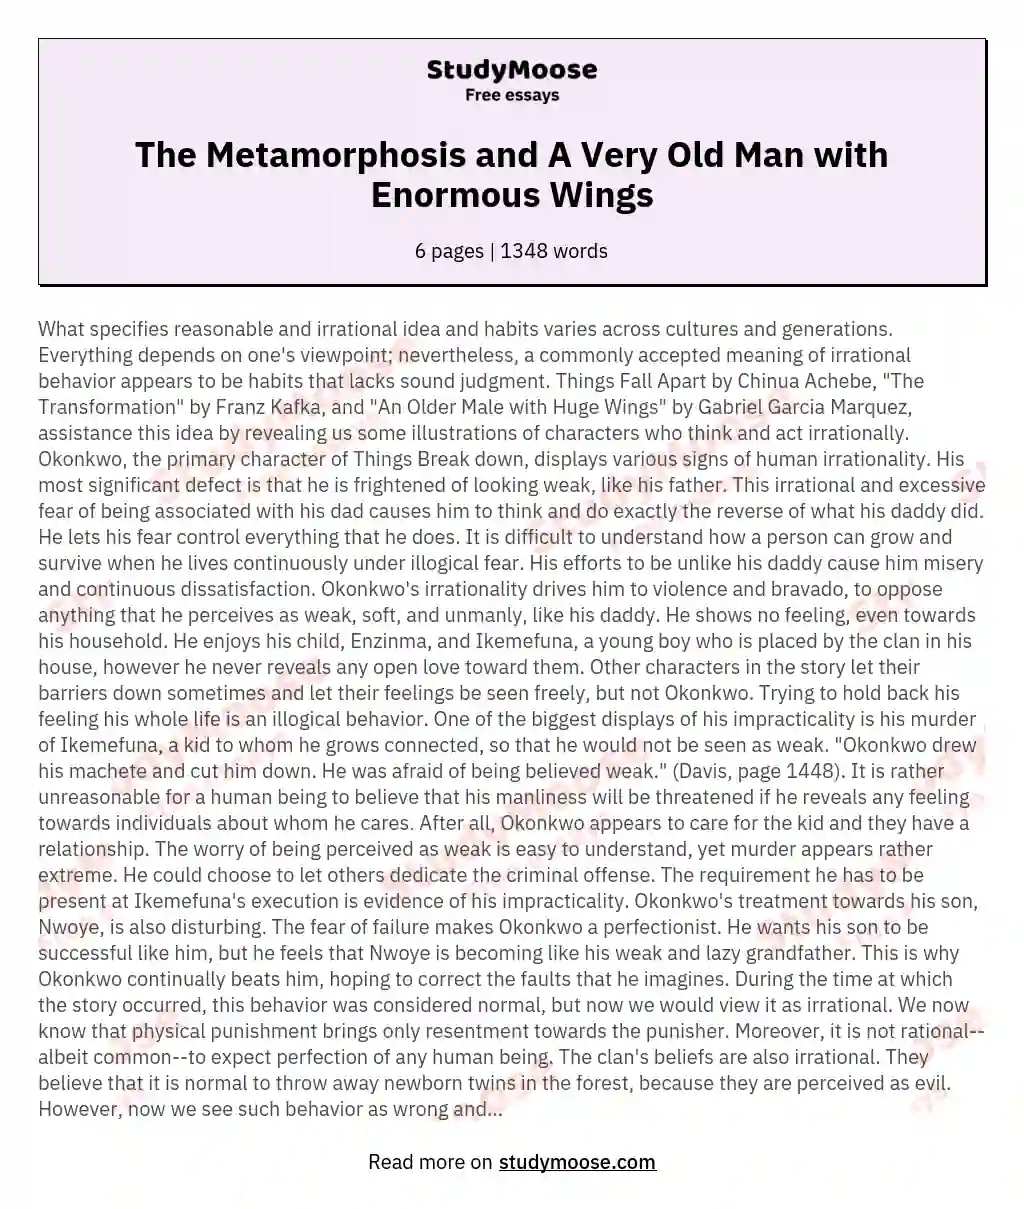 The Metamorphosis and A Very Old Man with Enormous Wings